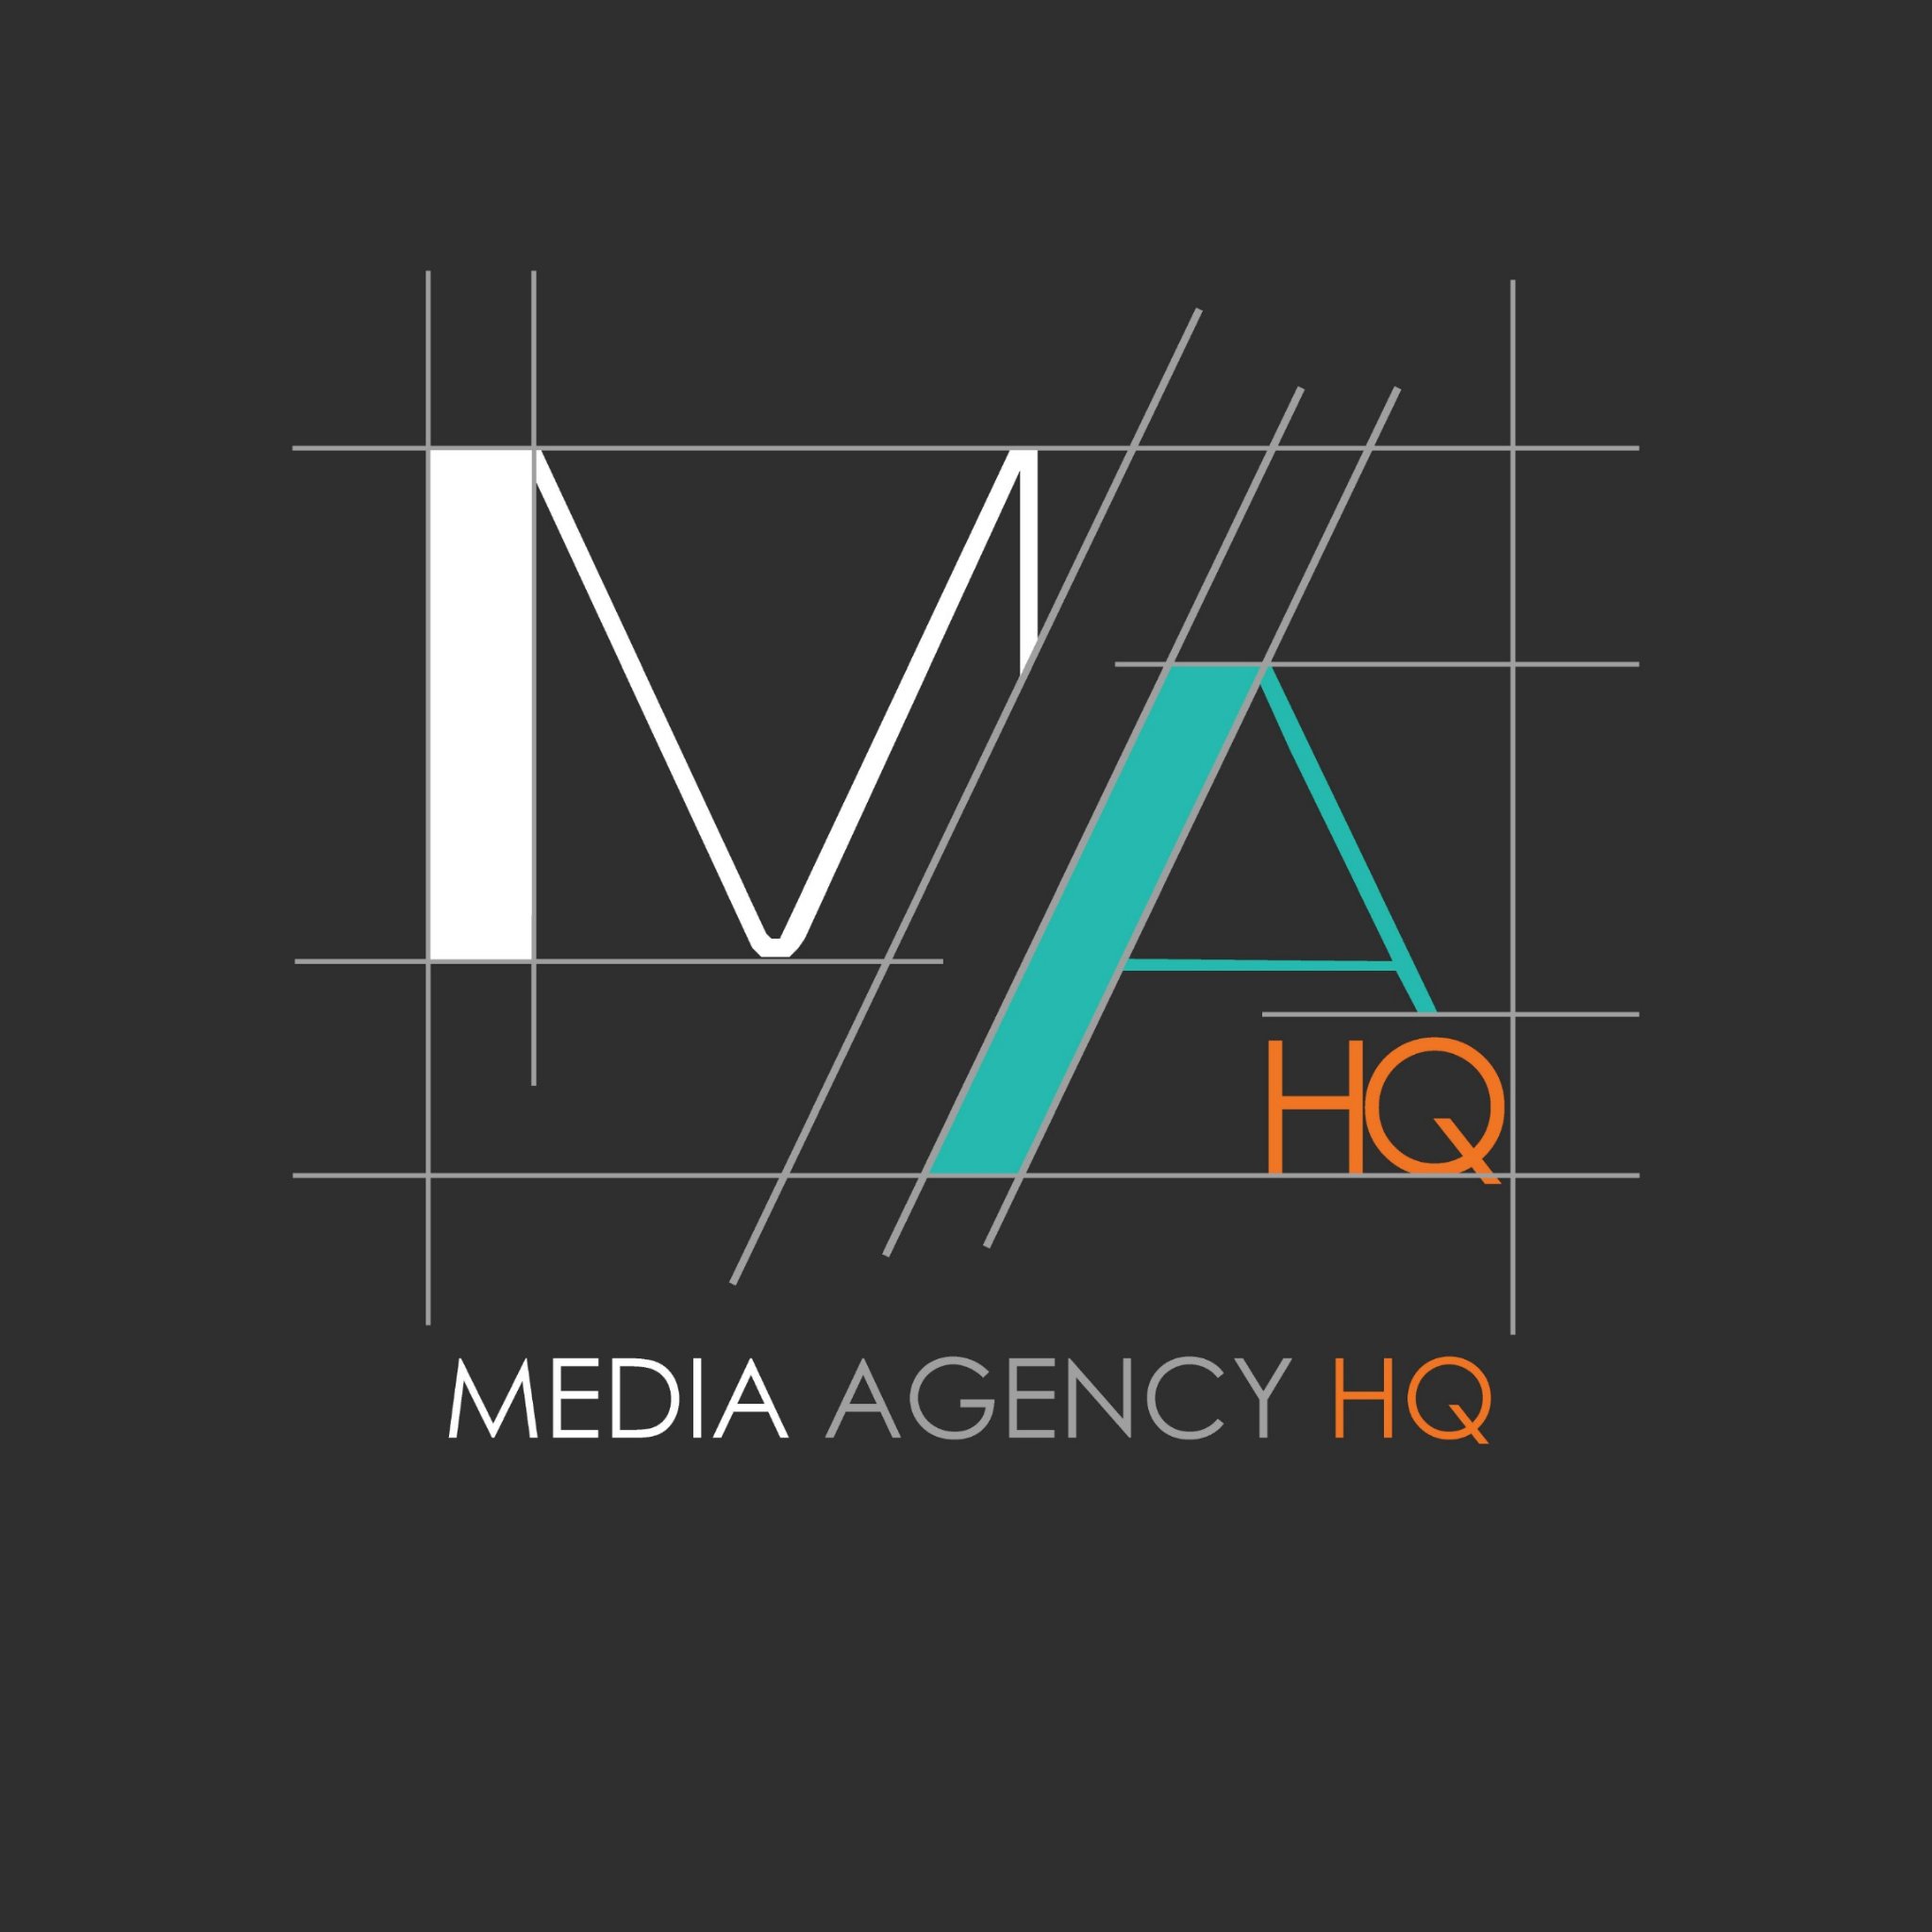 We guarantee 1000+ new authentic Instagram followers every month as well as build and design customizable website platforms.
-info@mediaagencyhq.com